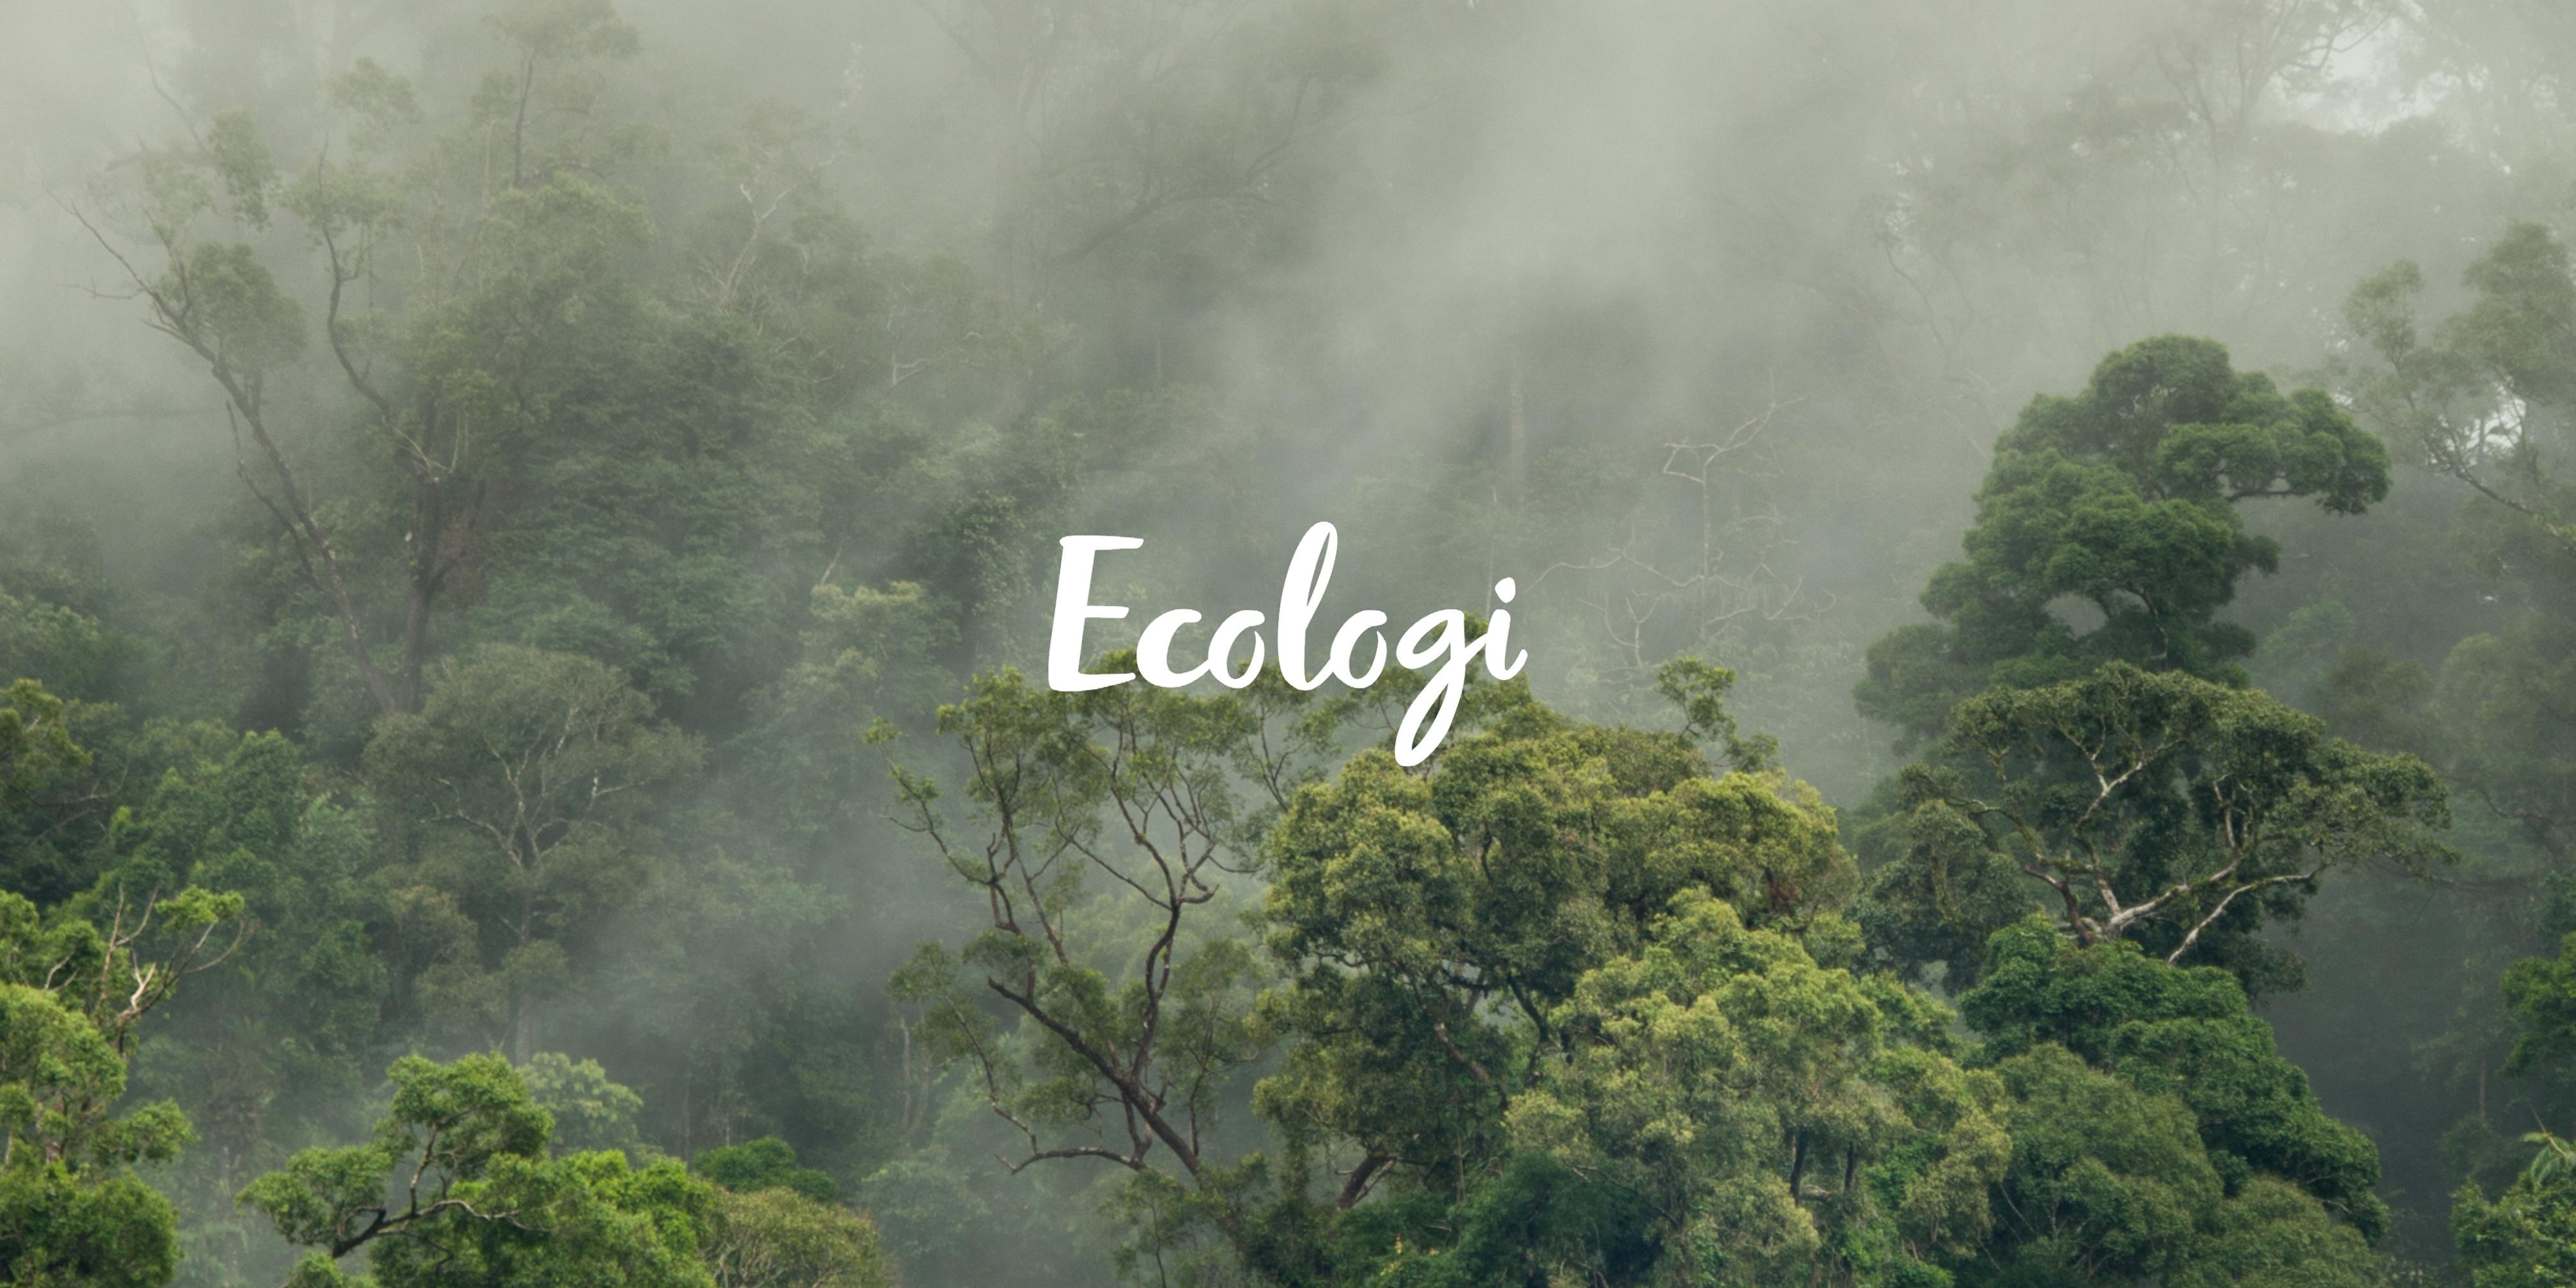 We plant a tree with every order. Ecologie. Rainforest in mist